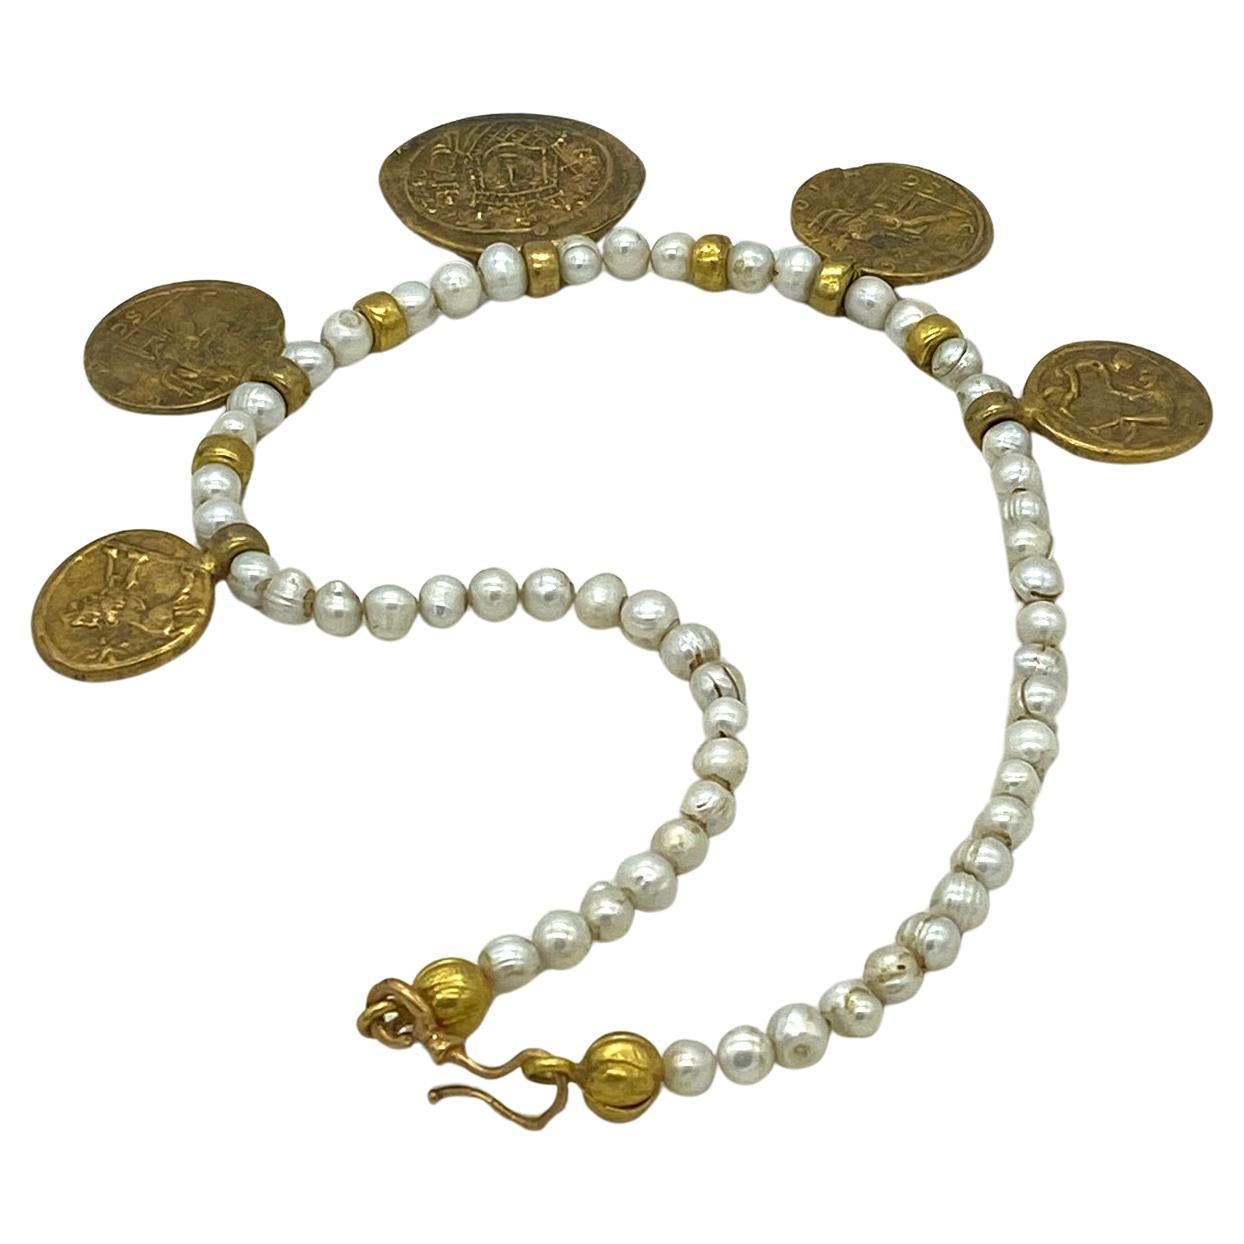 Bead Freshwater Pearl Necklace with Roman Coin Charms For Sale